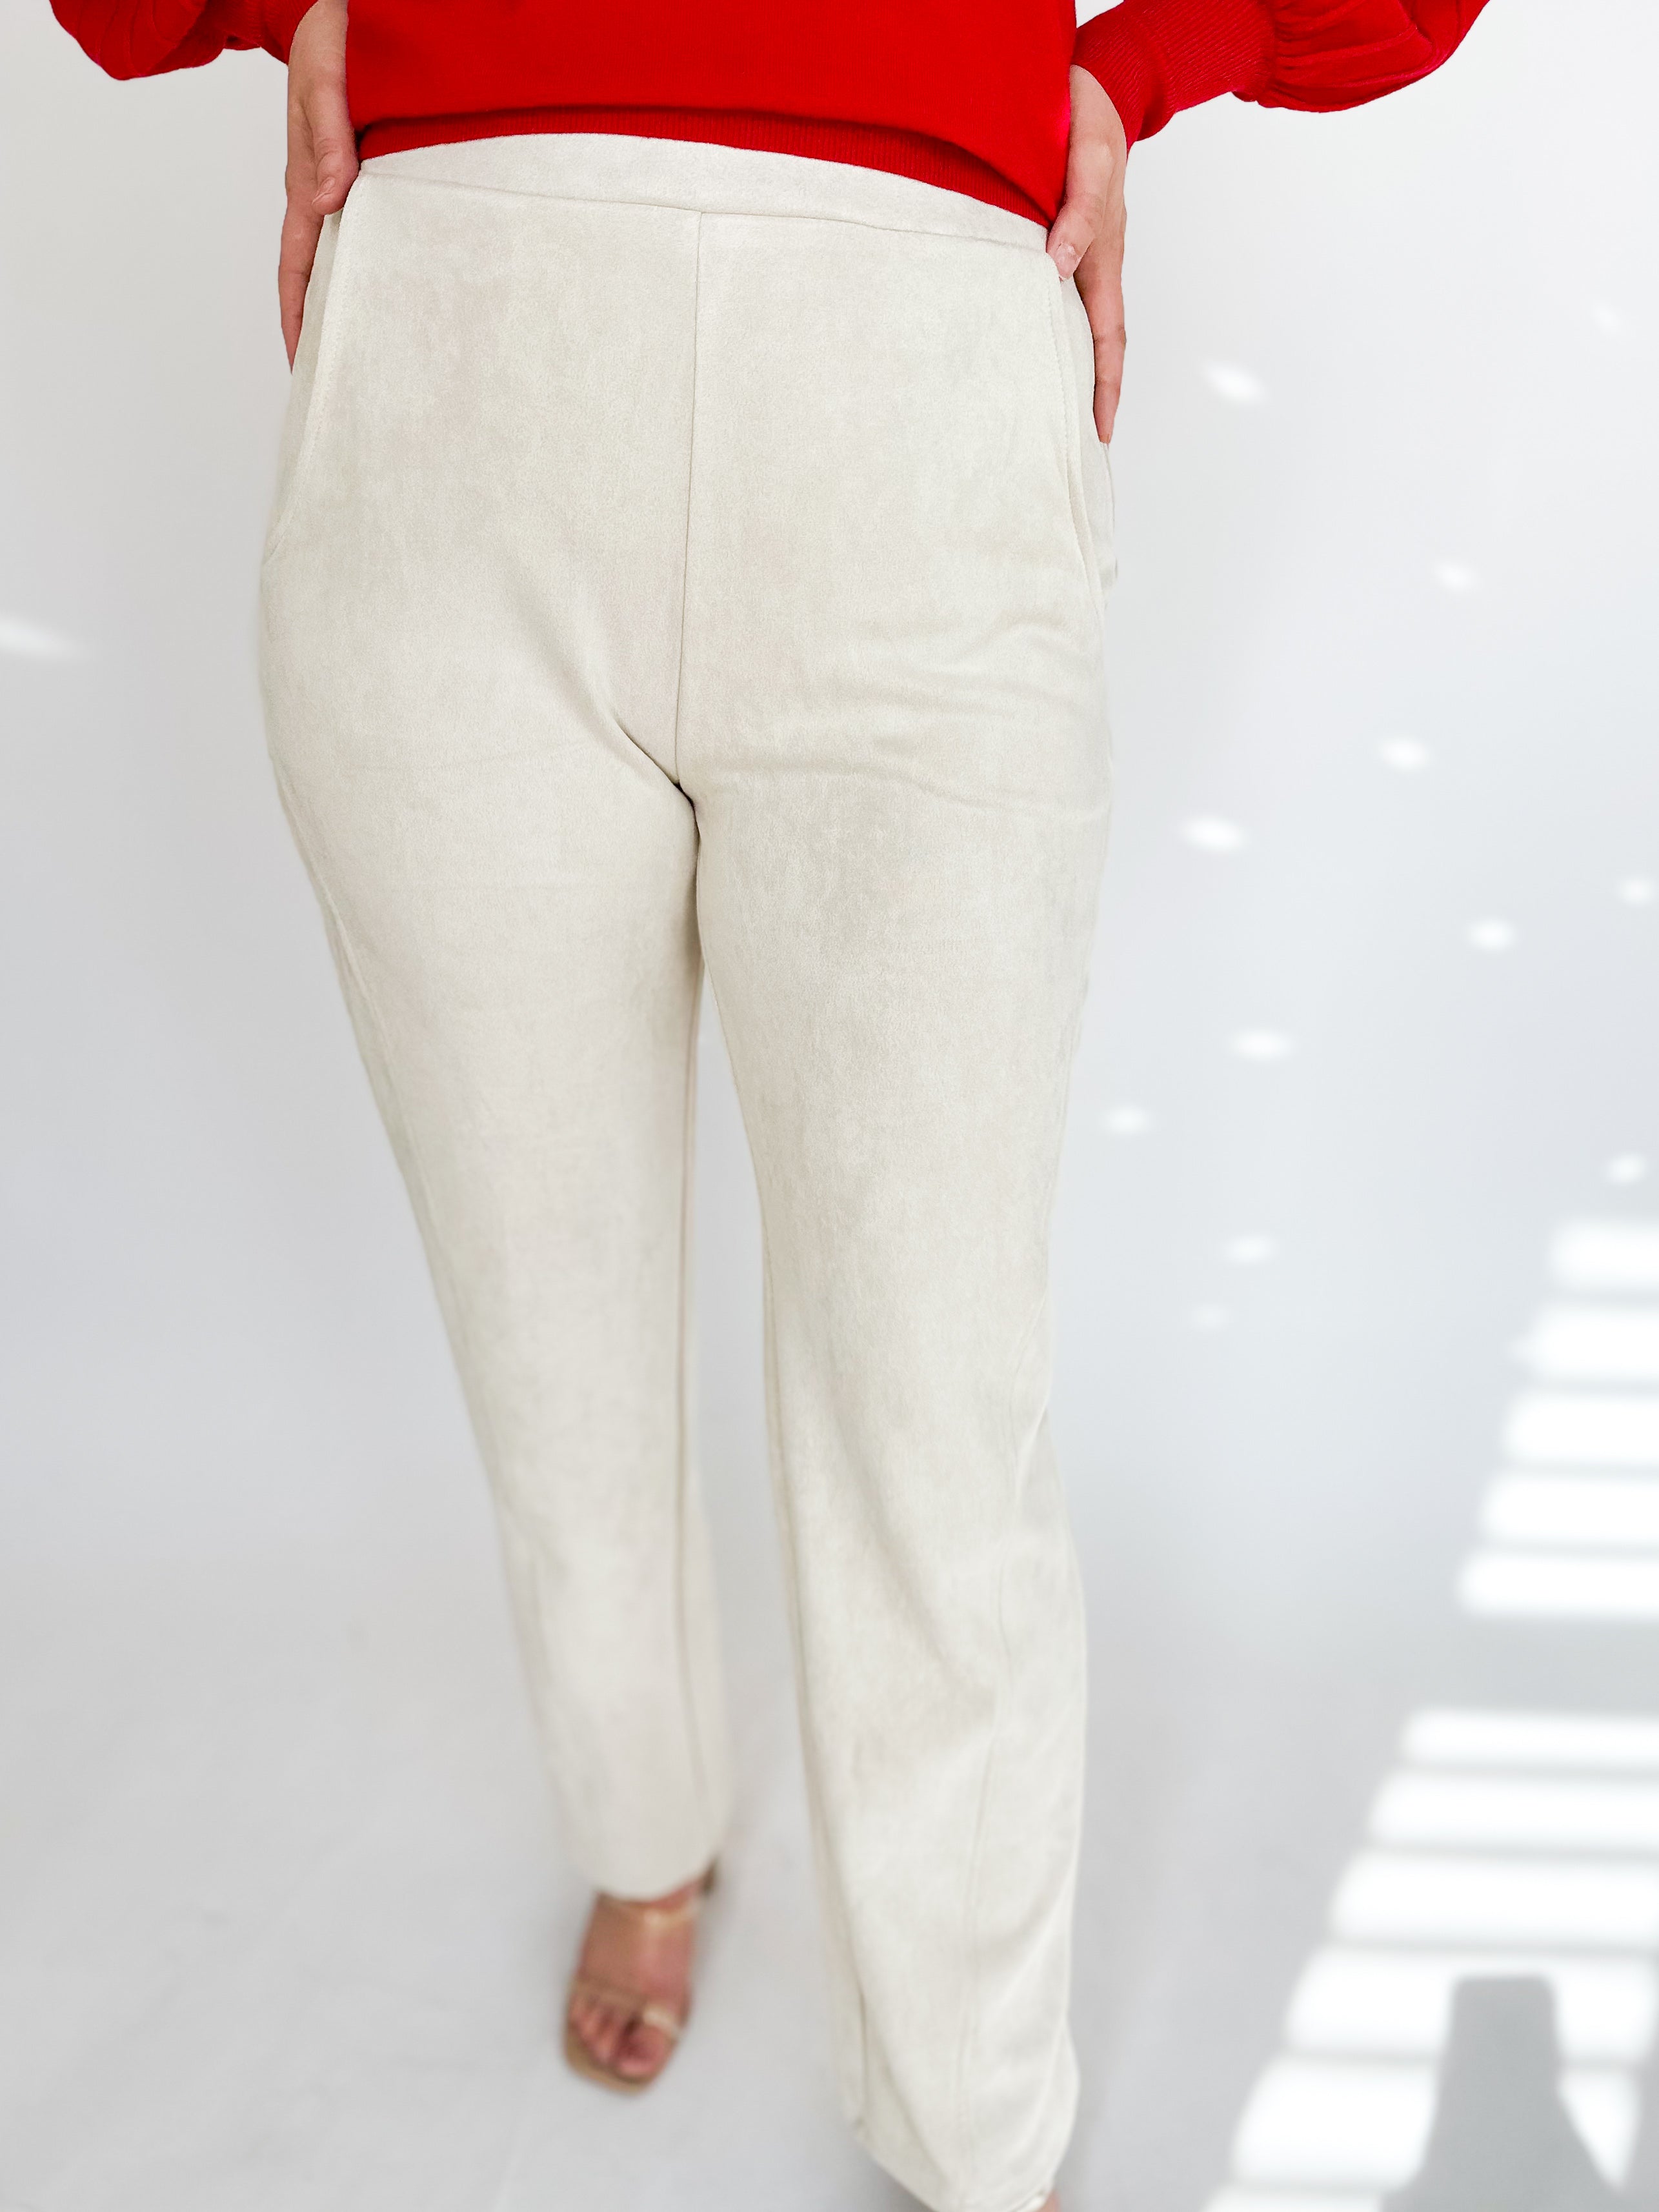 Chic Trousers - Cream-400 Pants-ALLIE ROSE-July & June Women's Fashion Boutique Located in San Antonio, Texas